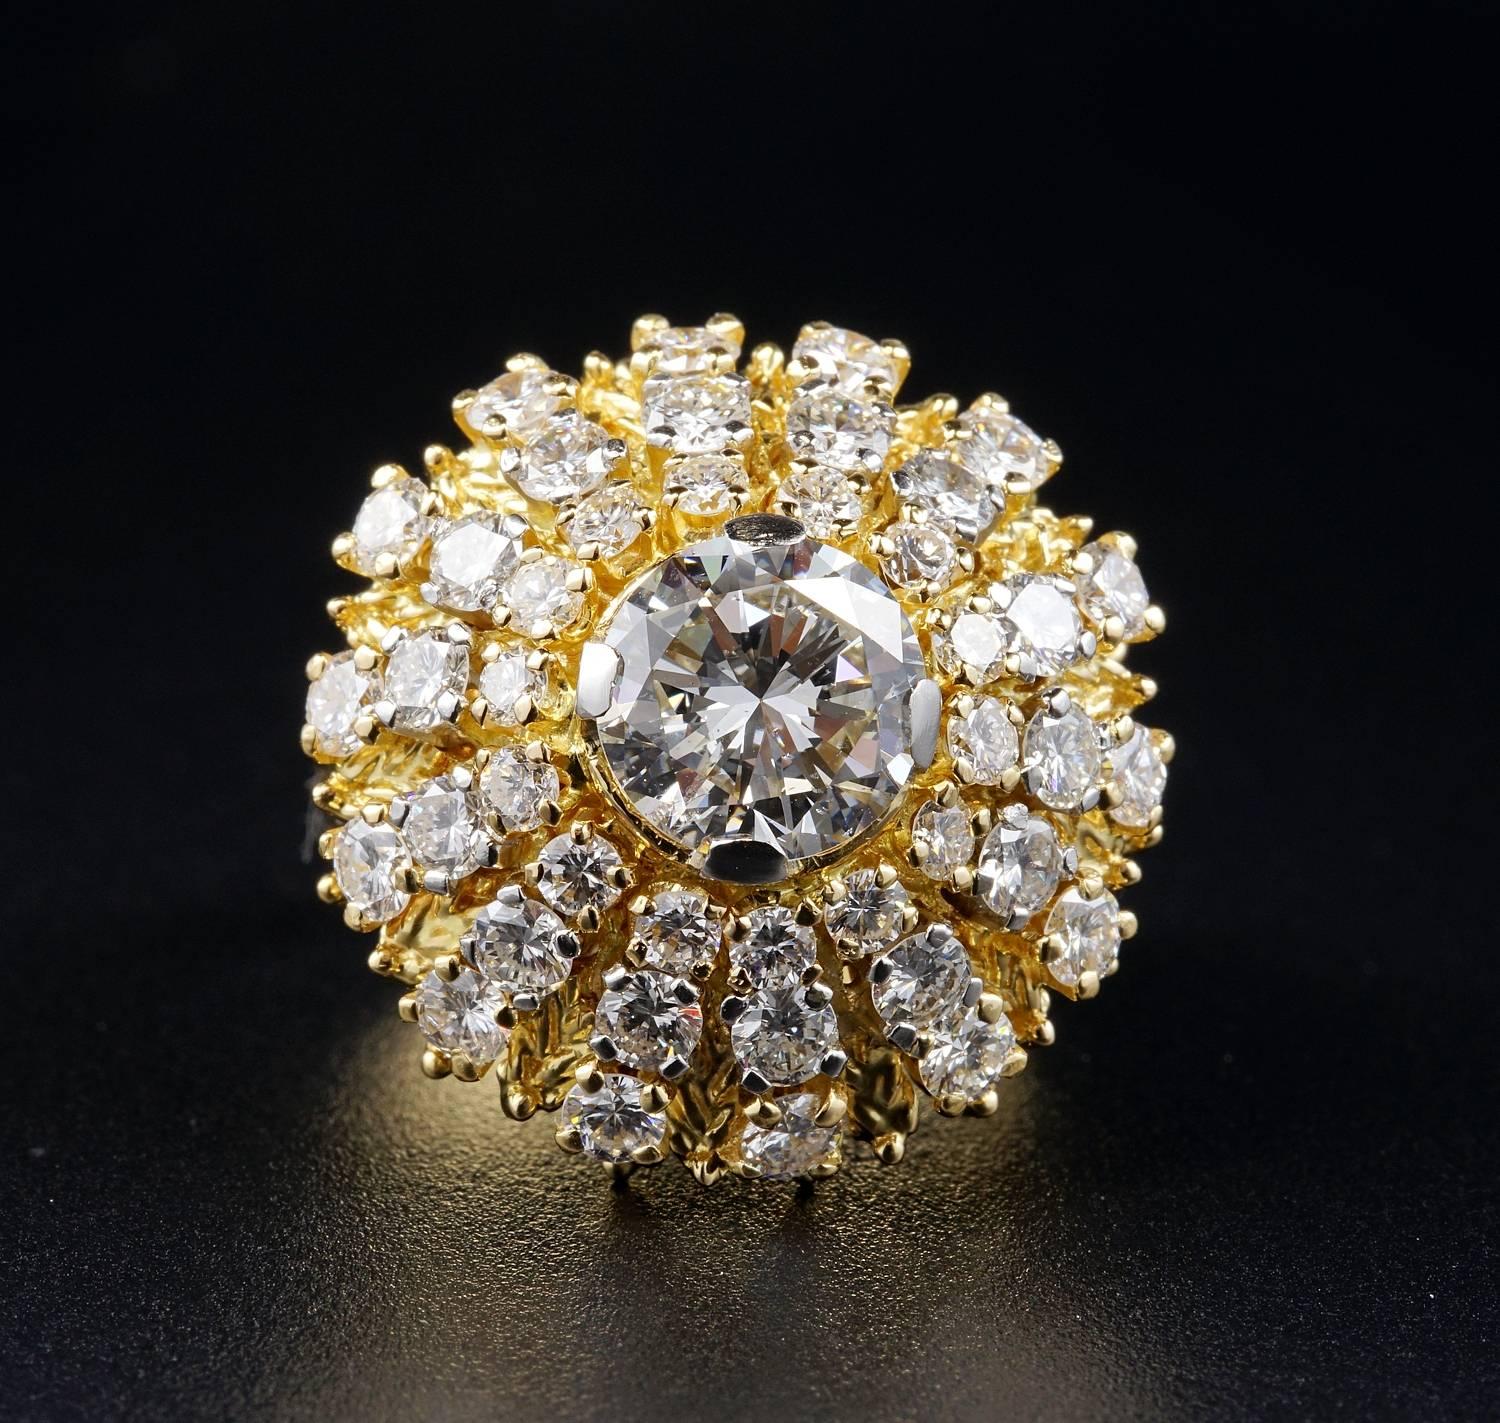 An Exceptional Vintage, mid century, large content Diamond cluster ring displaying all the glamour of the 50's jewellery, bold, attractive and full of lively Diamond Sparkle.
The ring has been hand crafted of solid 18 KT gold, looks very much the